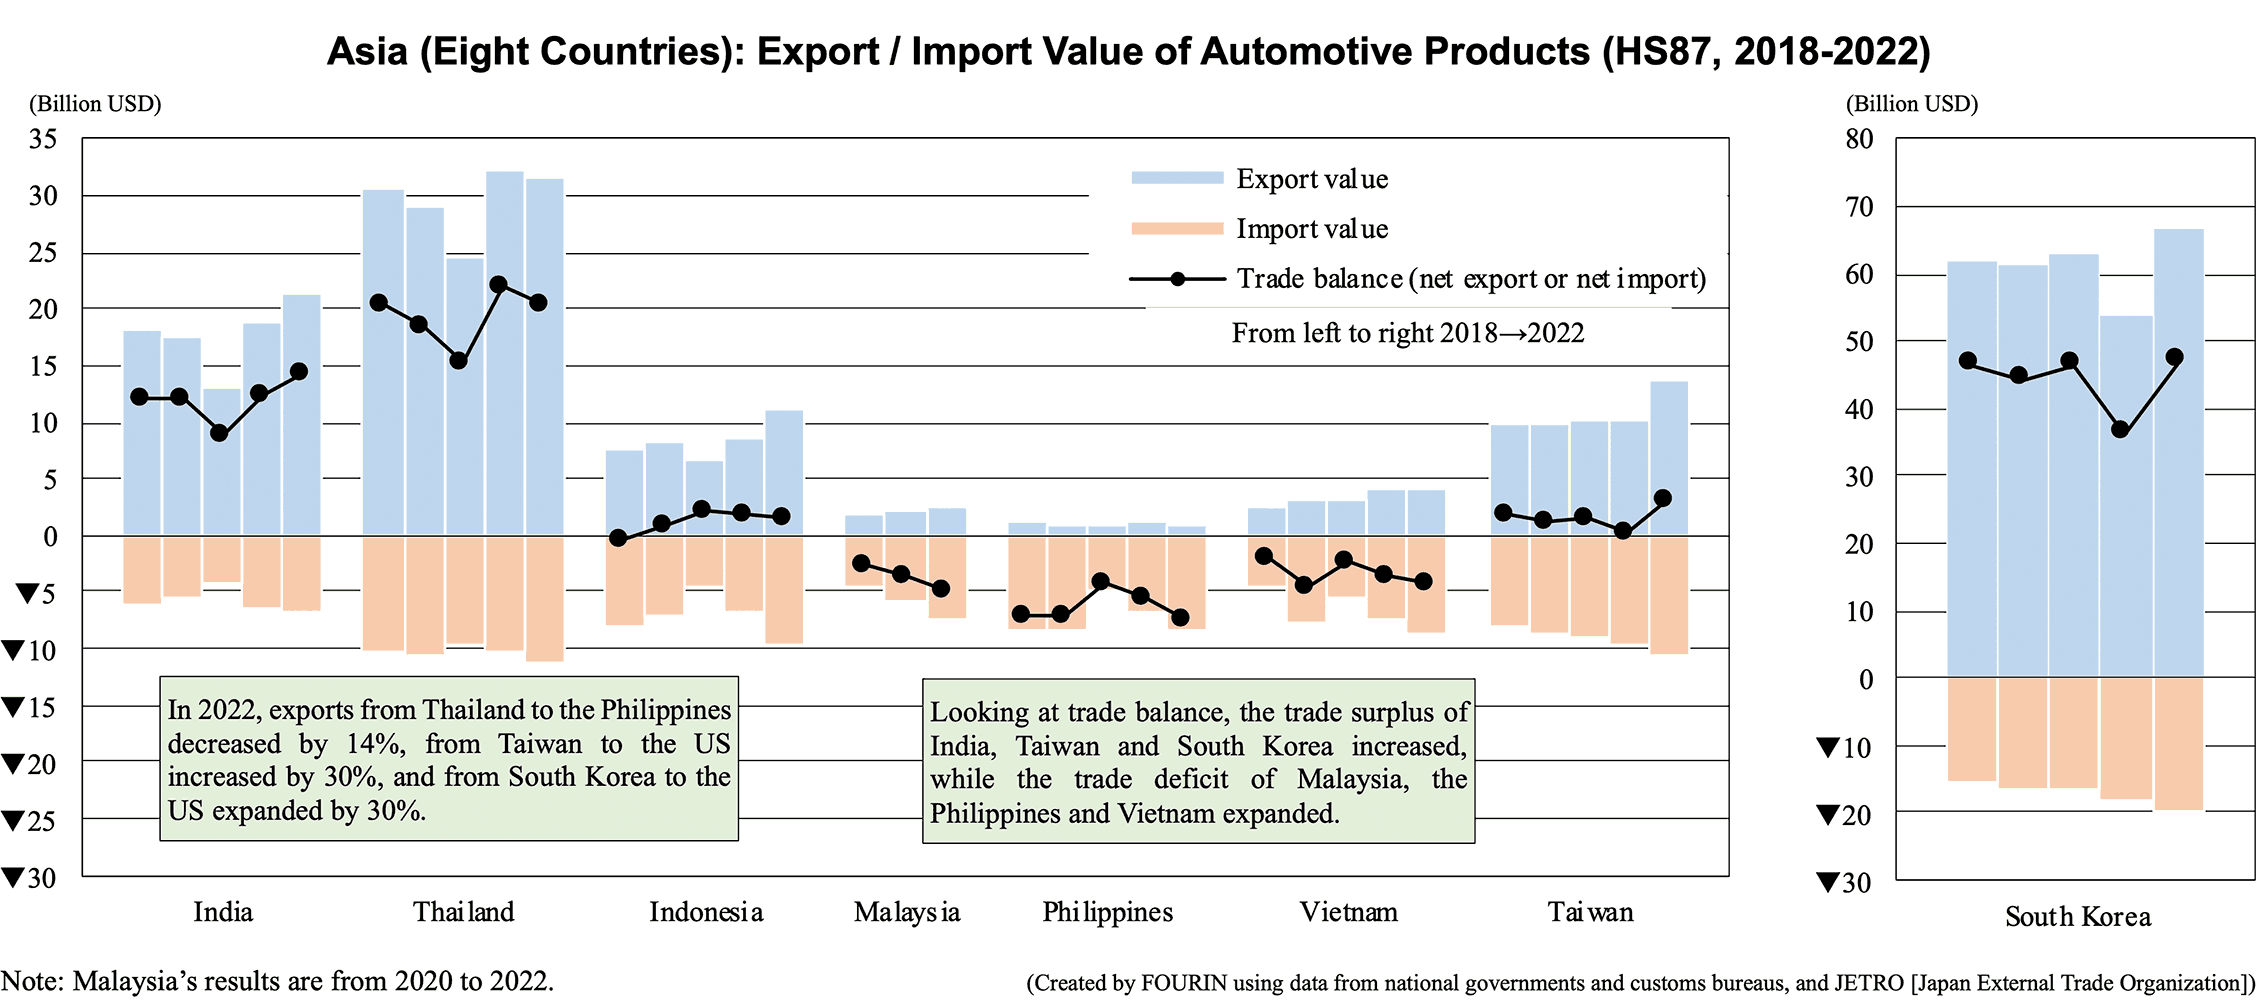 Graphs: Asia (Eight Countries): Export / Import Value of Automotive Products (HS87, 2018-2022)